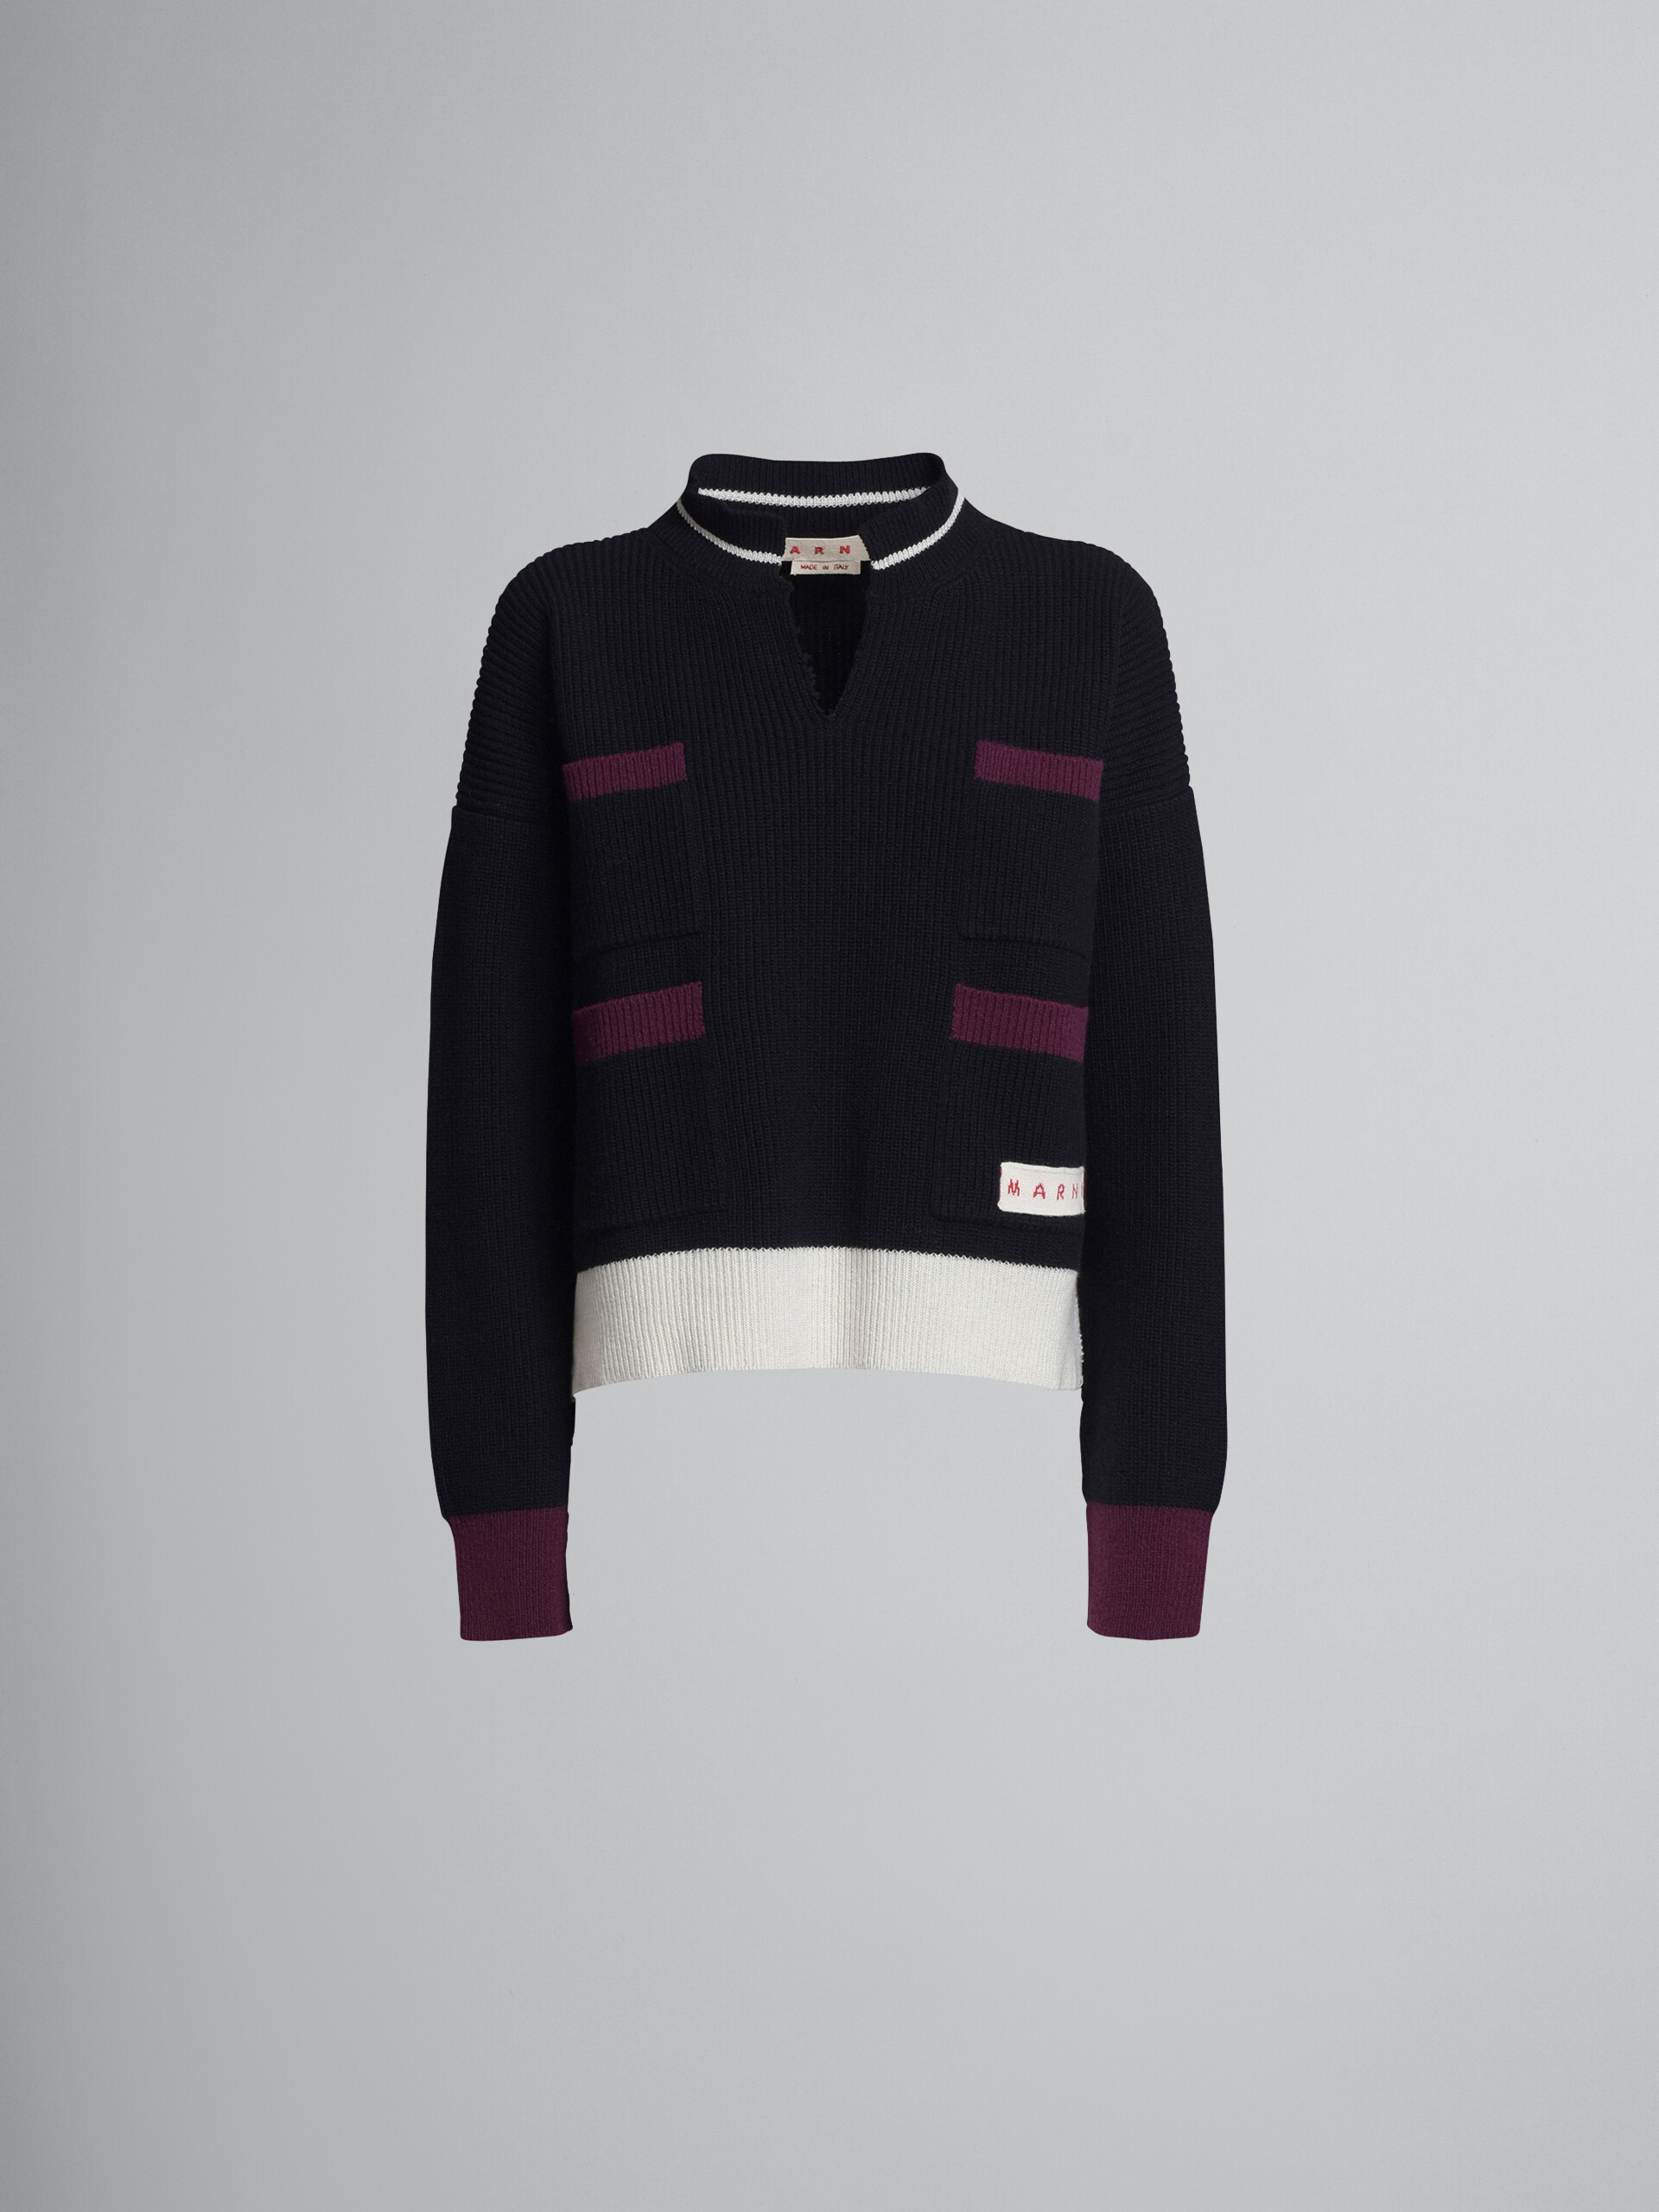 Shetland wool and cotton cropped crewneck sweater - Pullovers - Image 1